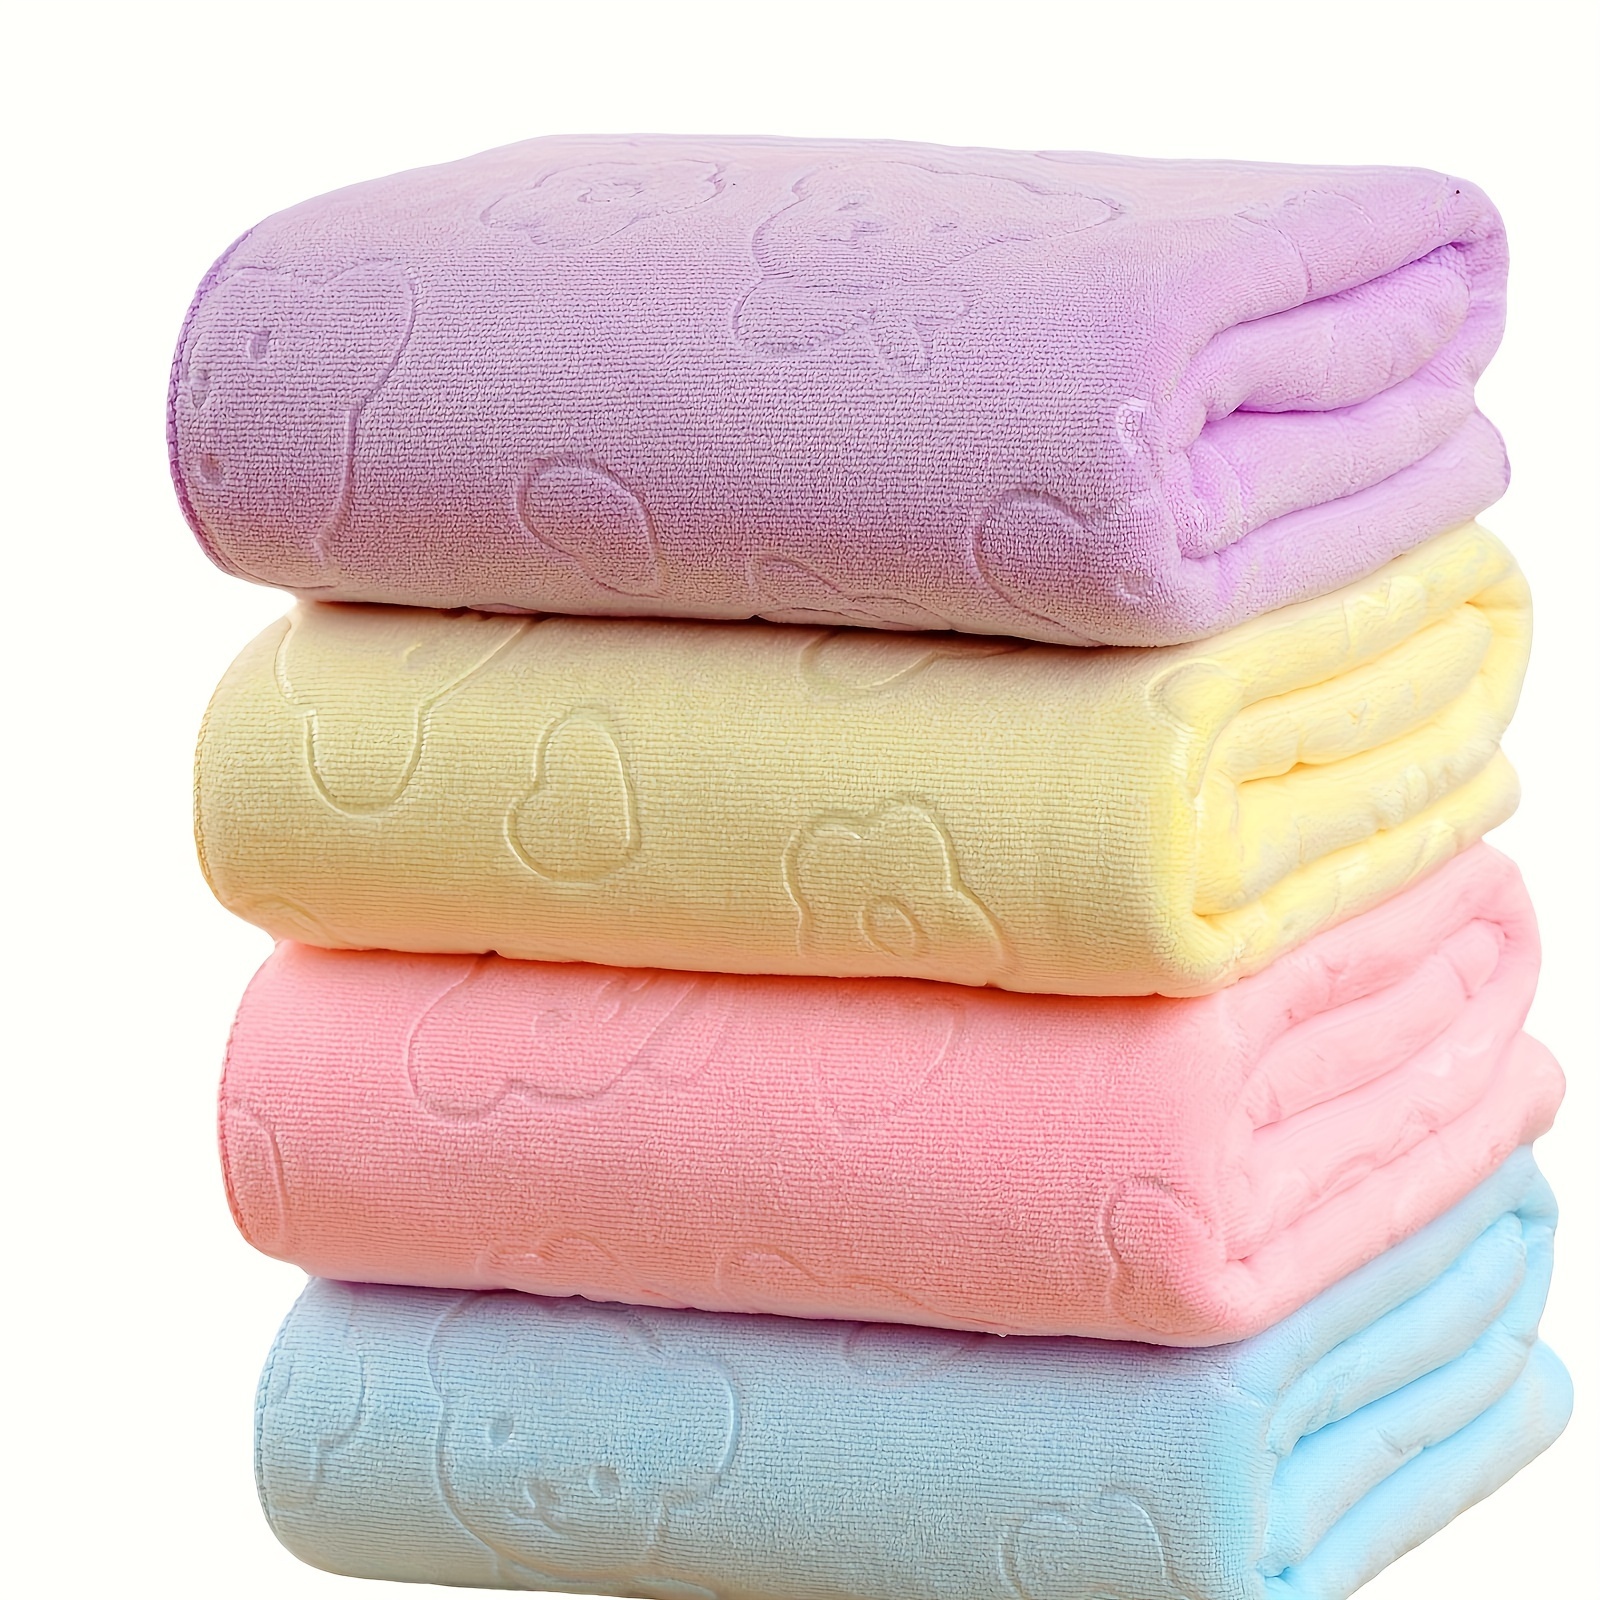 

1 Piece Microfiber Embossed Bear Bath Towel 27.6 Inches * 55.1 Inches Beach Towel Absorbent Soft Non-shedding Non-fading Gift Bath Towel